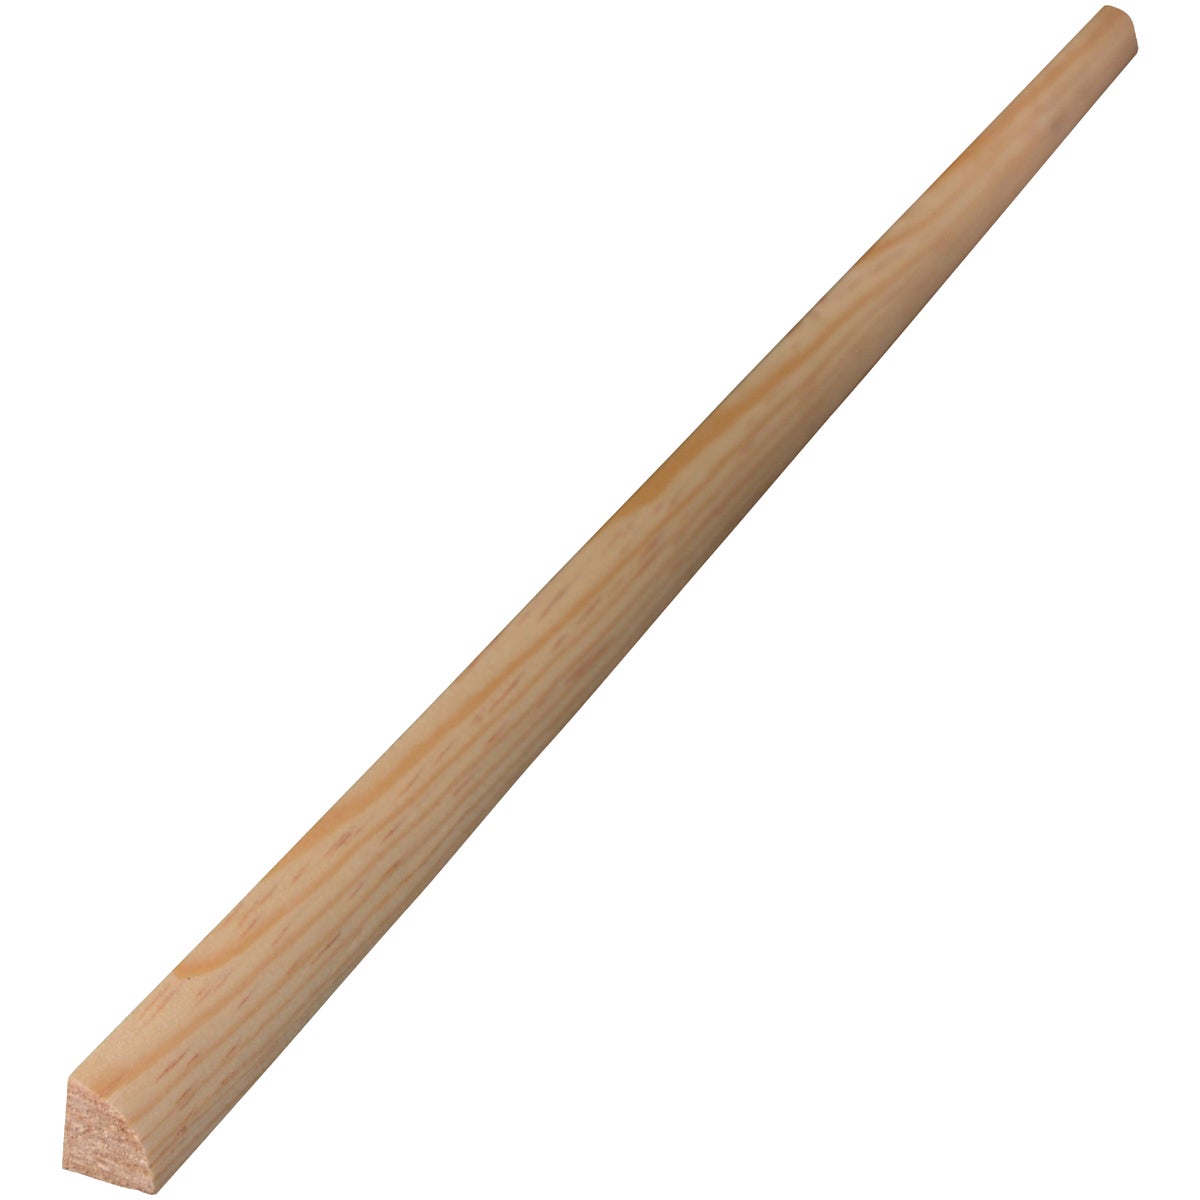 Alexandria Moulding 1/2 In. W. x 1/2 In. H. x 8 Ft. L. Solid Pine Quarter Round Molding